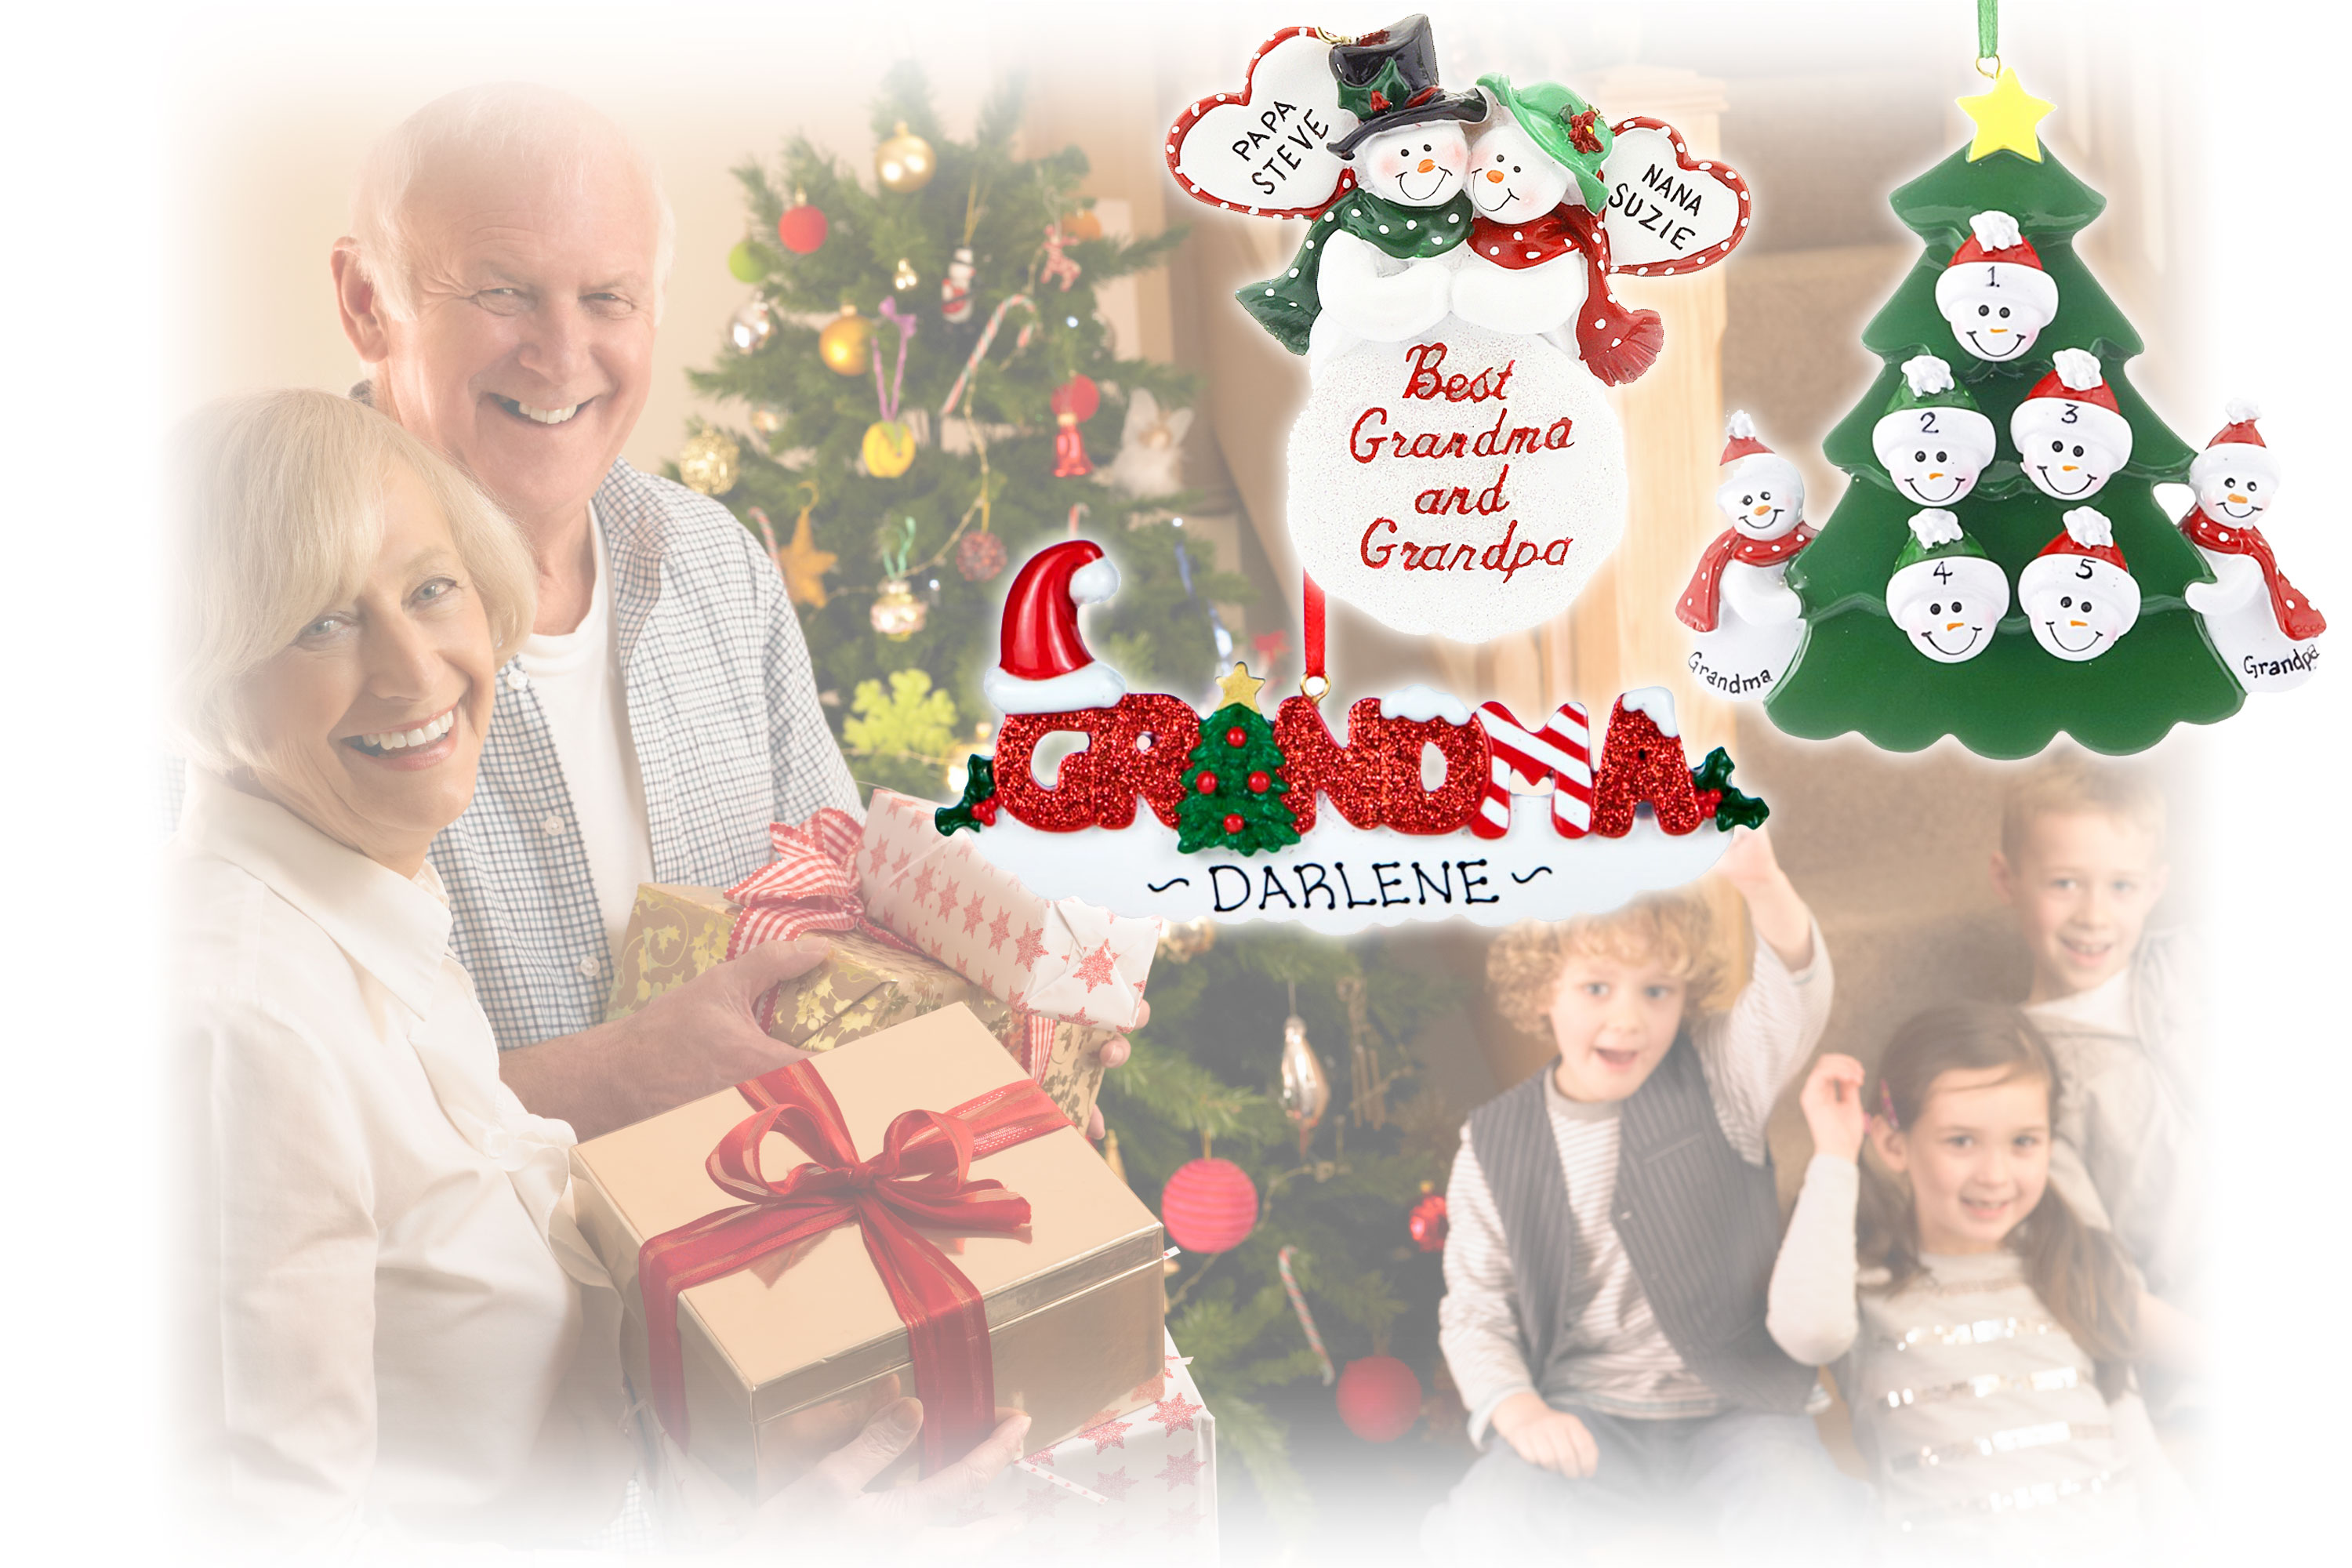 Gift grandparents personalized Christmas ornaments from the kids this year! | OrnamentShop.com